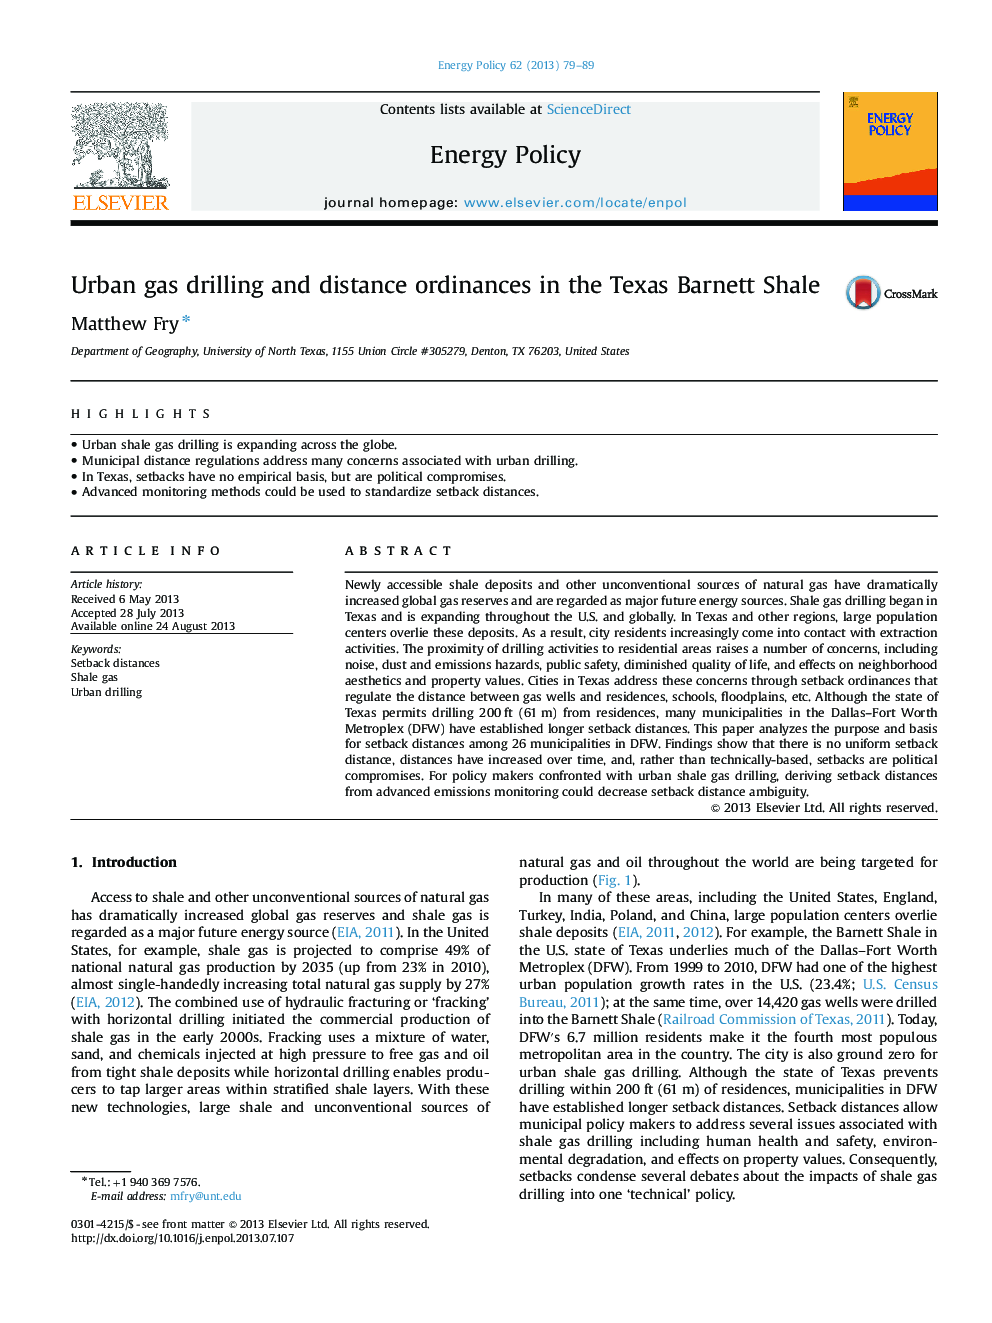 Urban gas drilling and distance ordinances in the Texas Barnett Shale